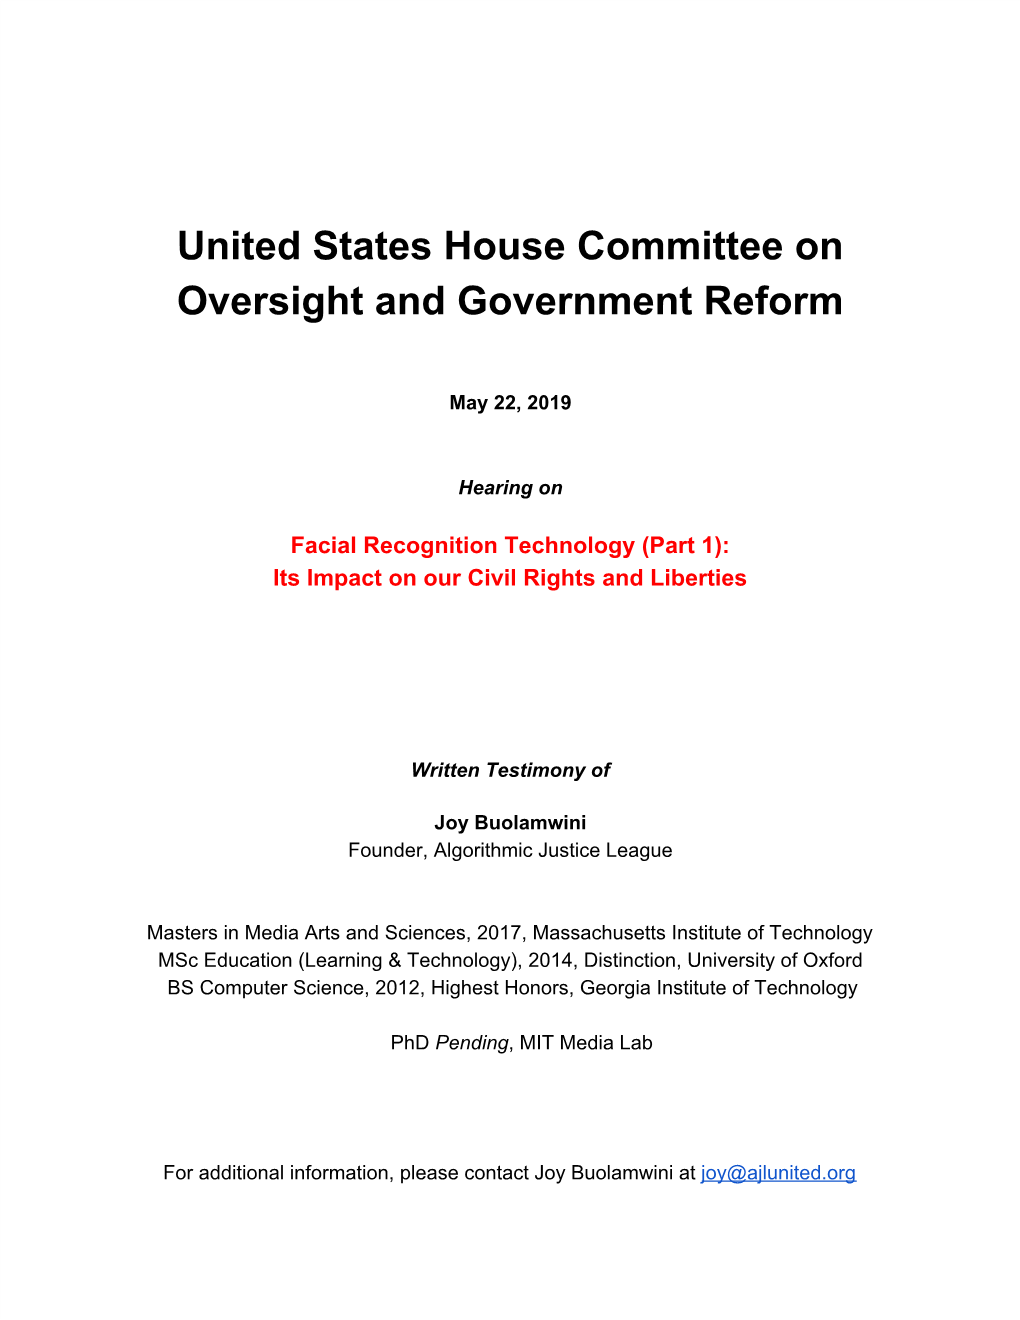 United States House Committee on Oversight and Government Reform